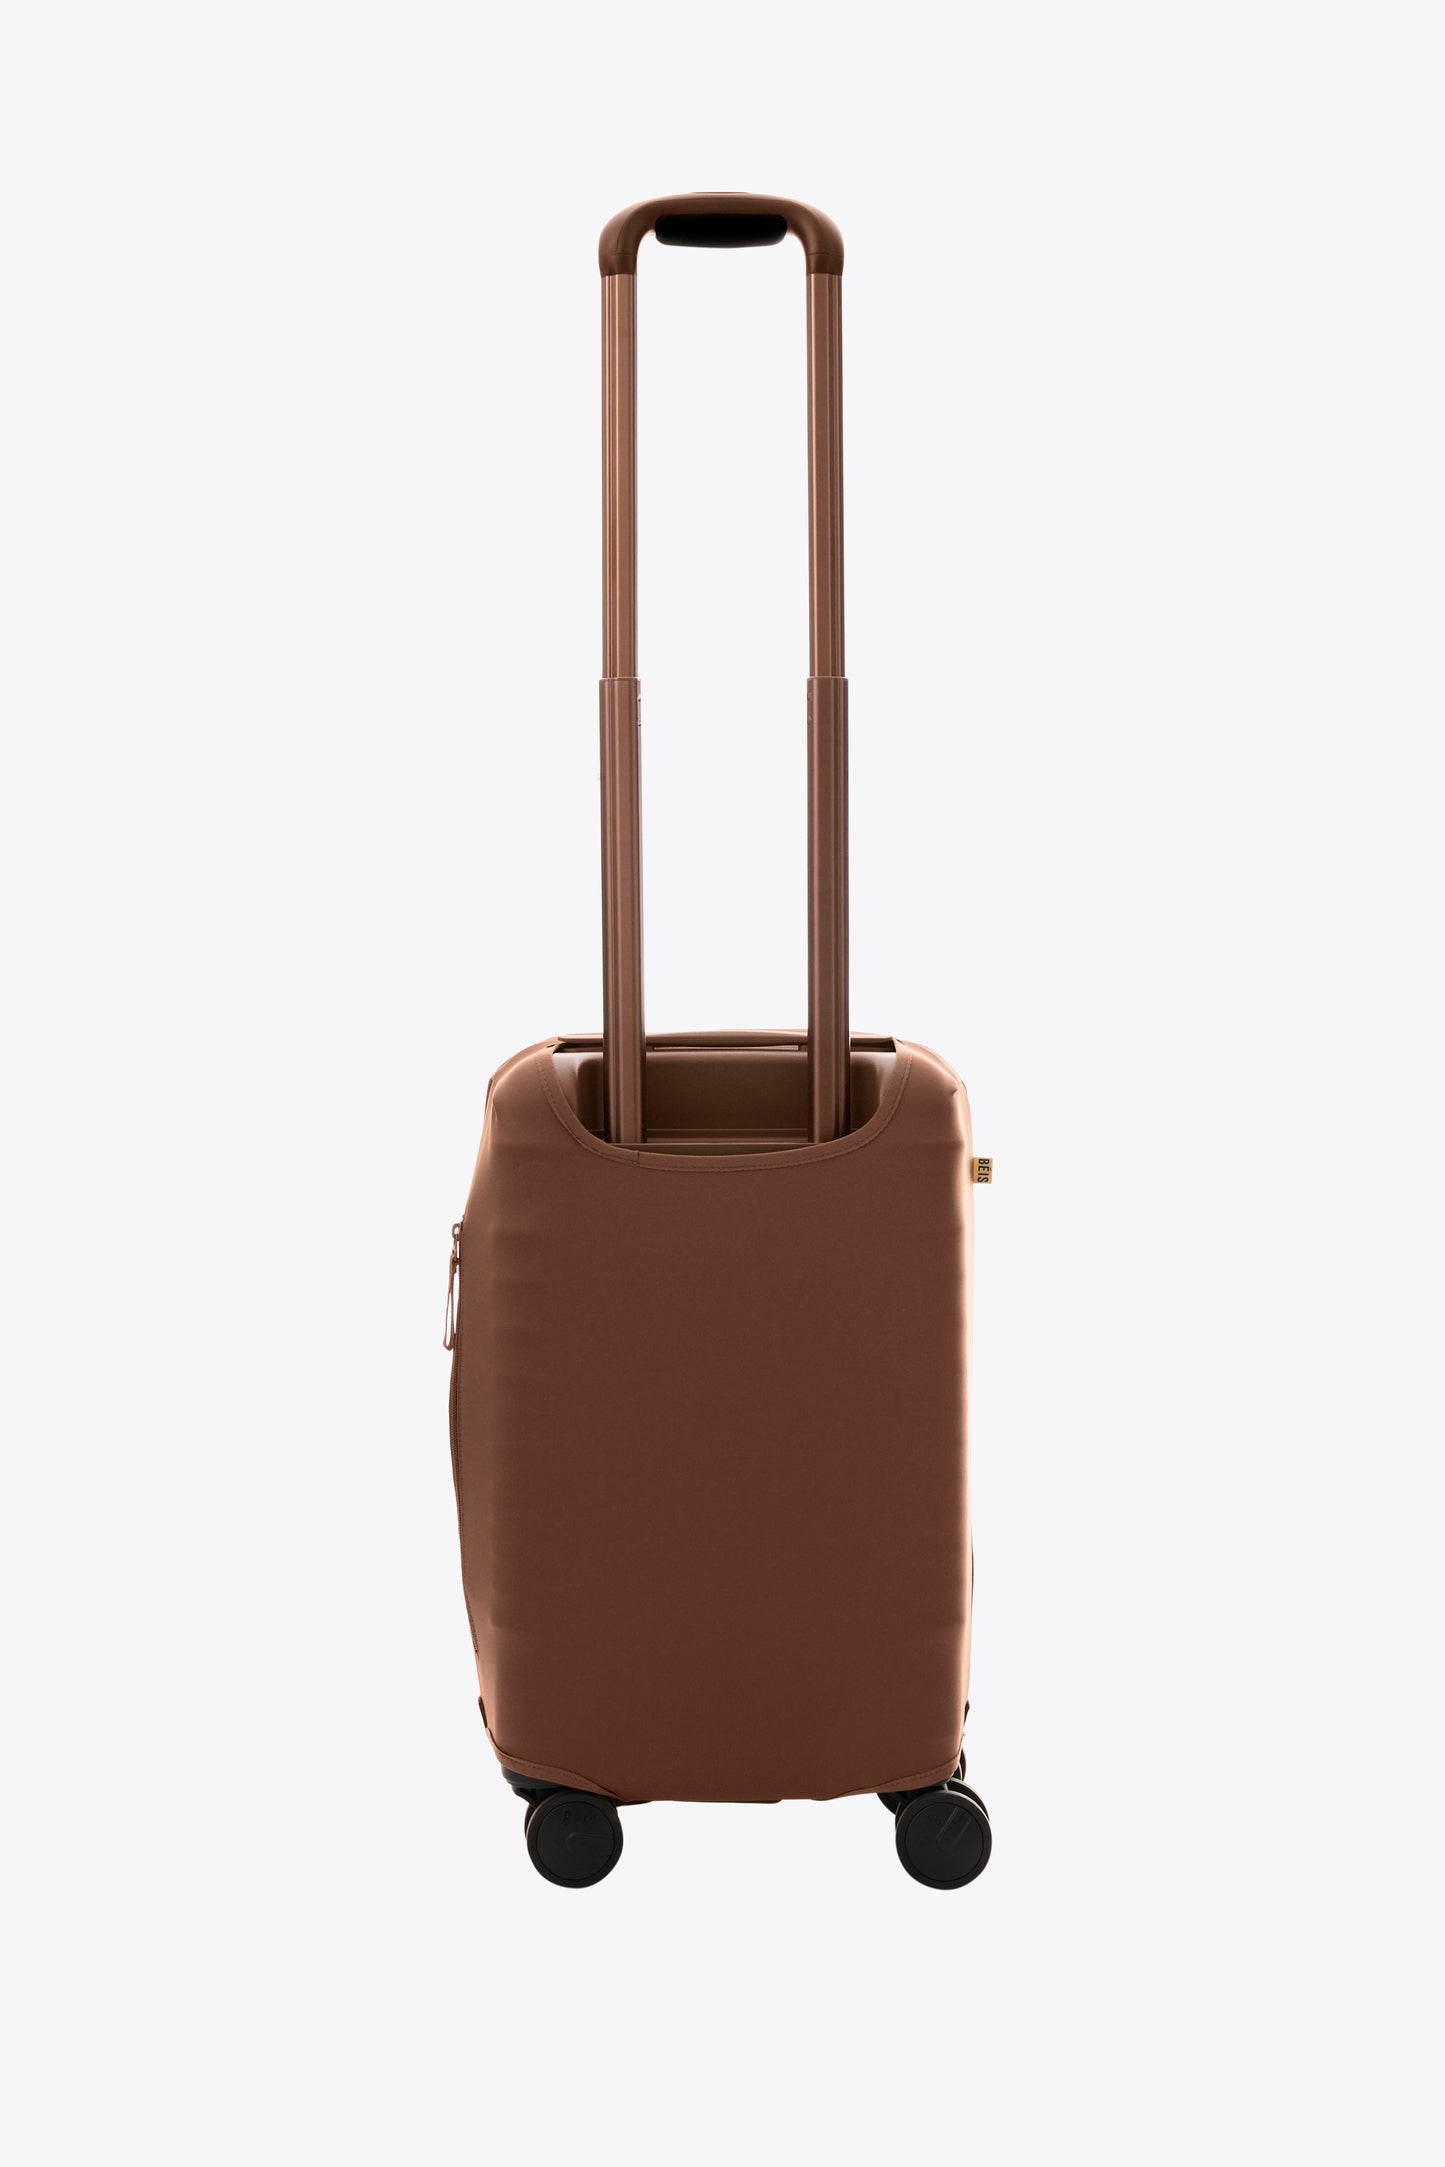 The Small Carry-On Luggage Cover in Maple